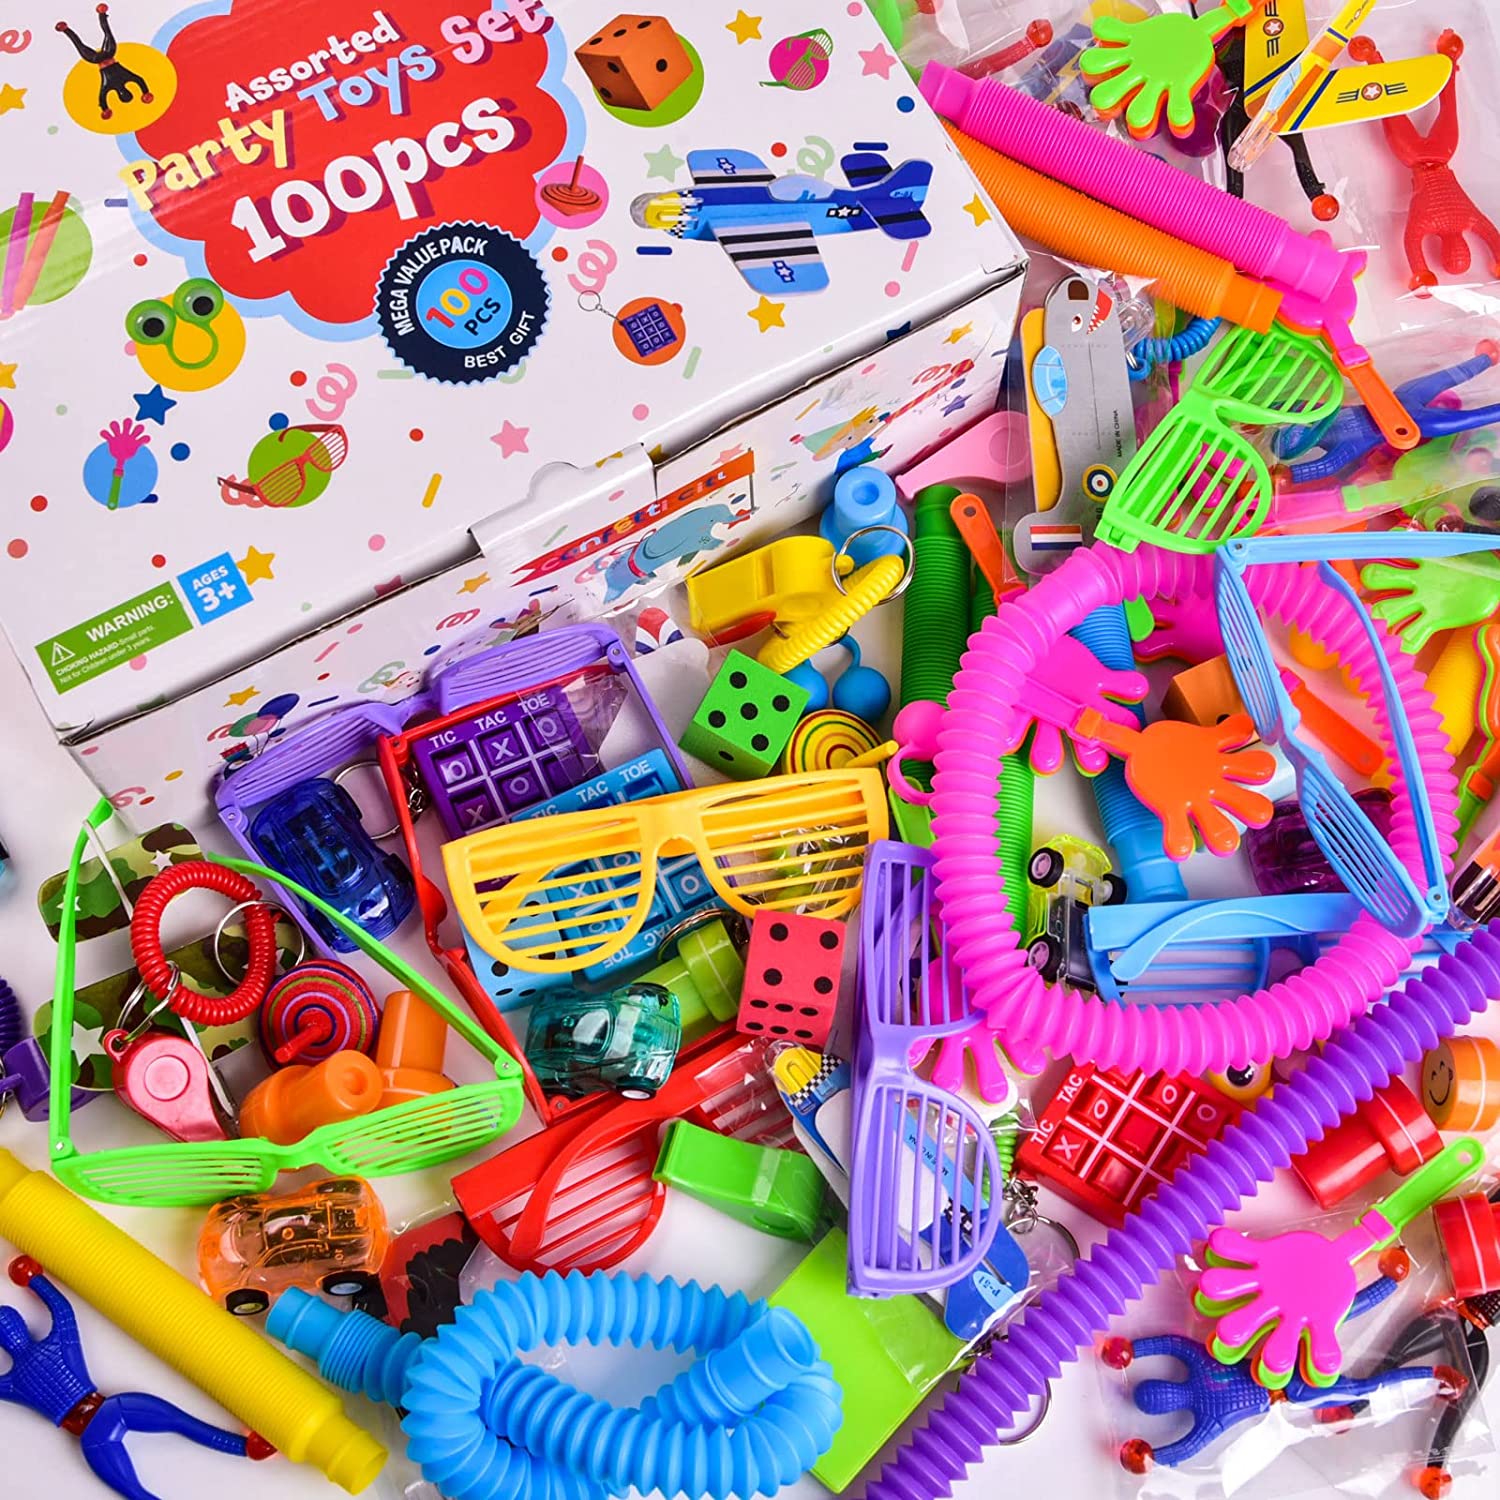 Fun Little Toys 100pcs Assorted Party Toys Set, Treasure Box Toys for Classroom Prizes, Piata Stuffer, Carnival Prizes, Party Favors for Kids